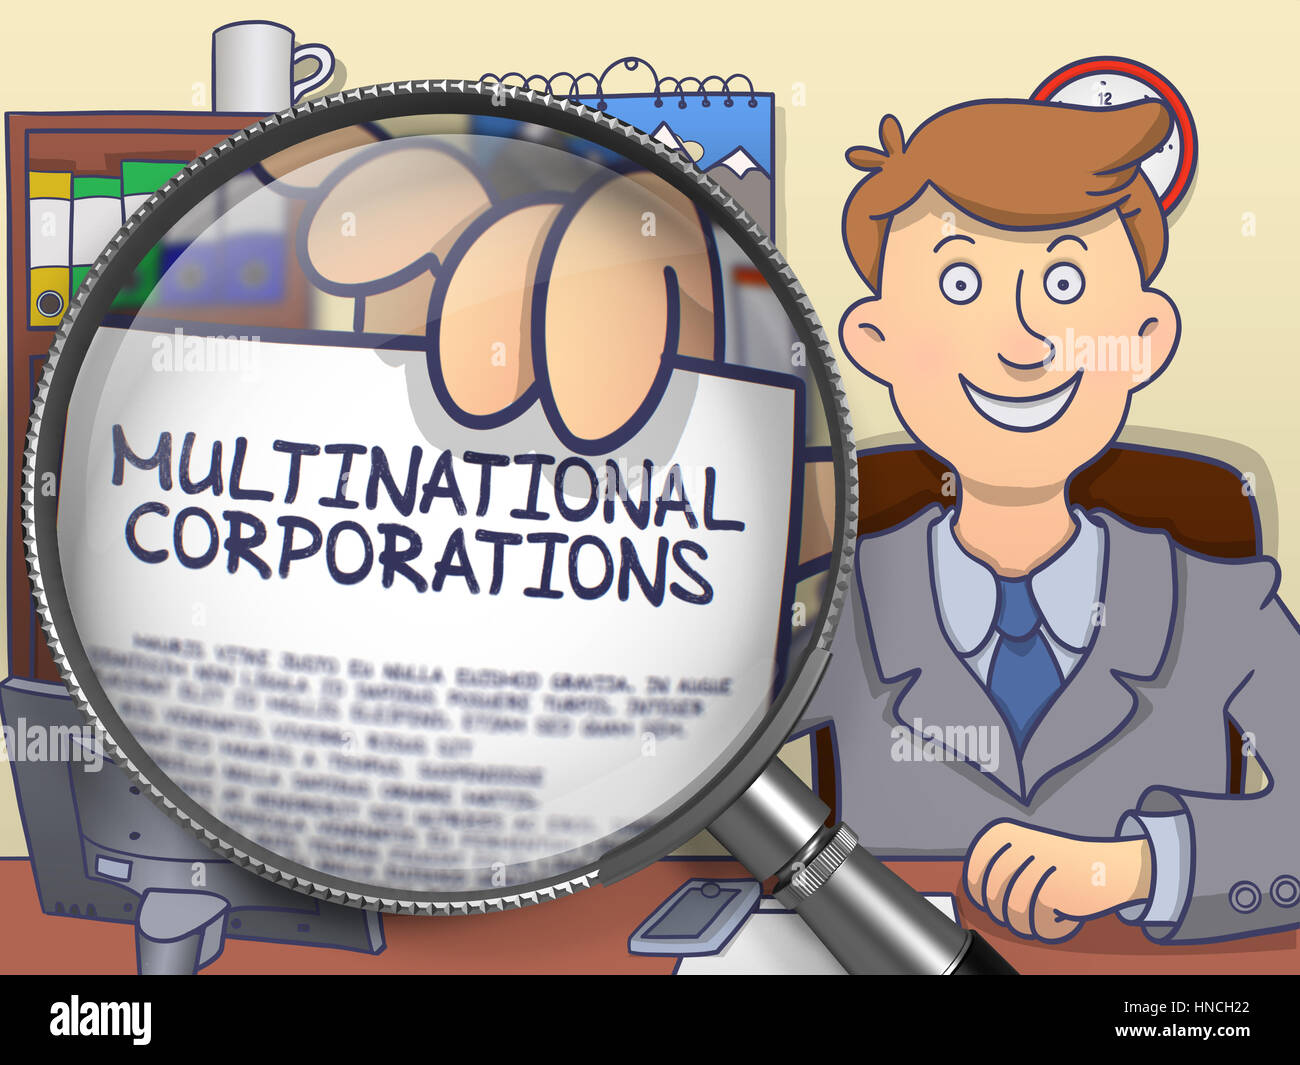 Multinational Corporations through Magnifying Glass.  Stock Photo